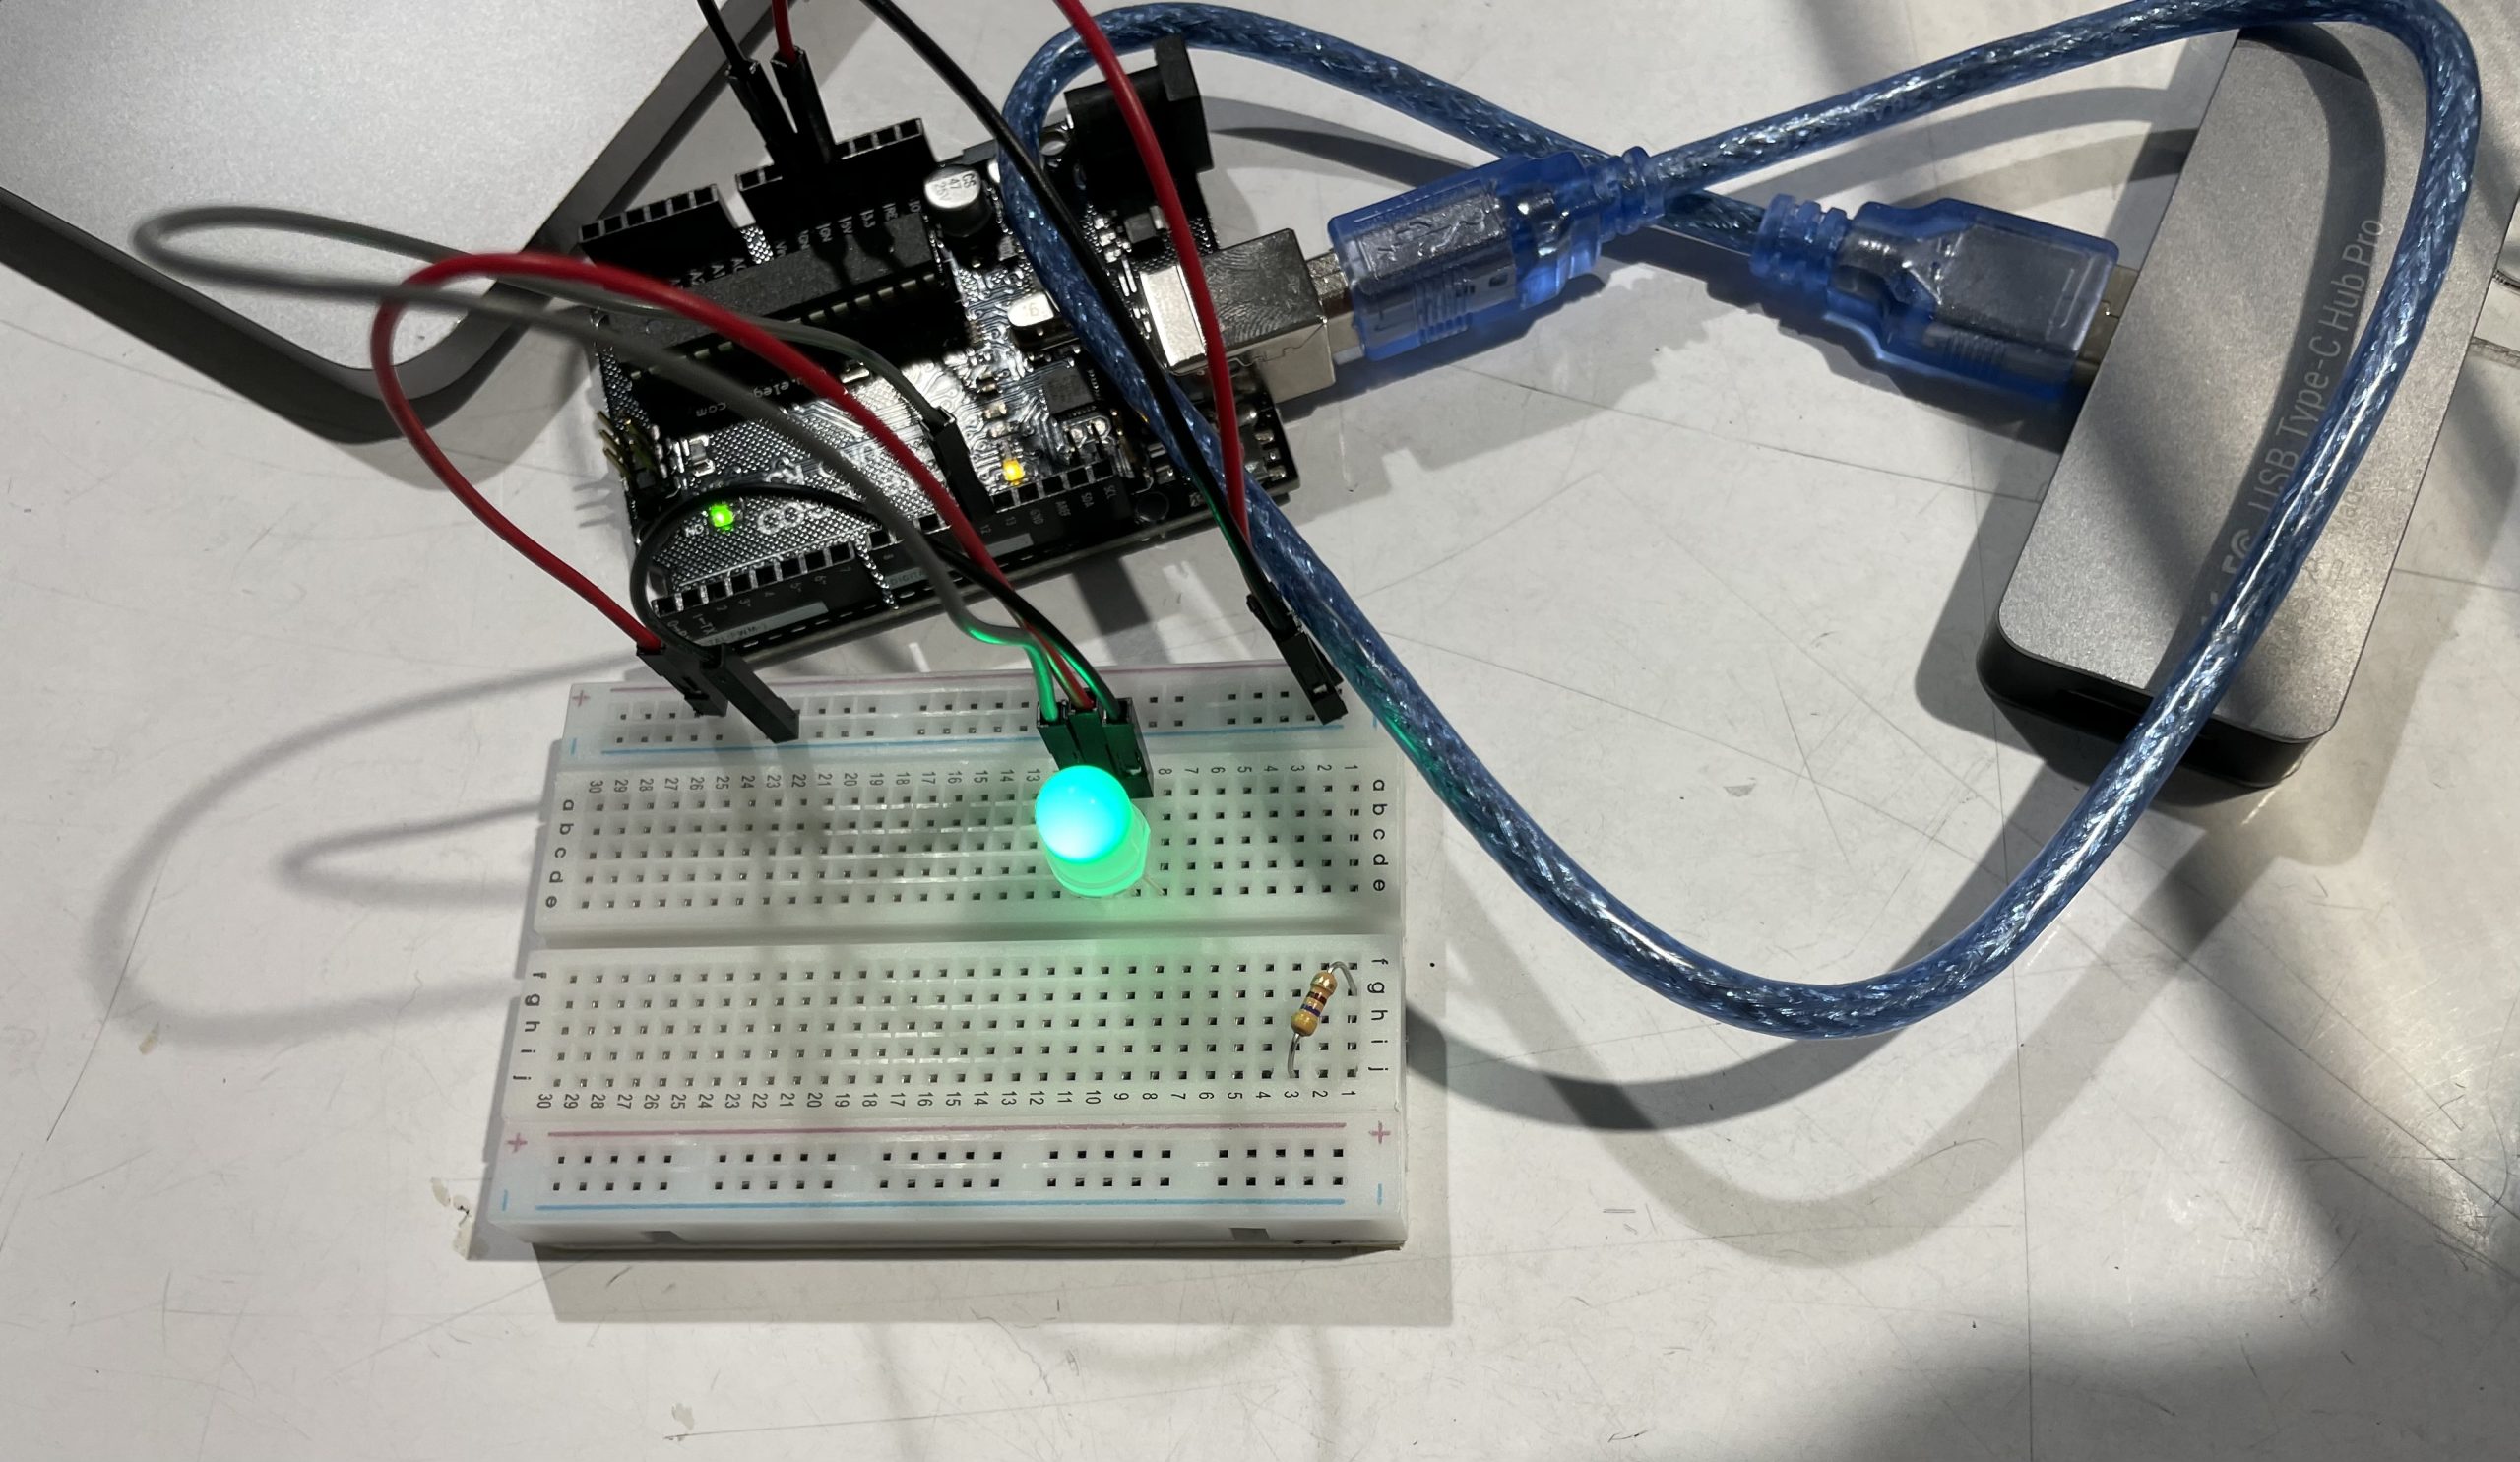 Neopixel bulb light up for the first time connected to Arduino 